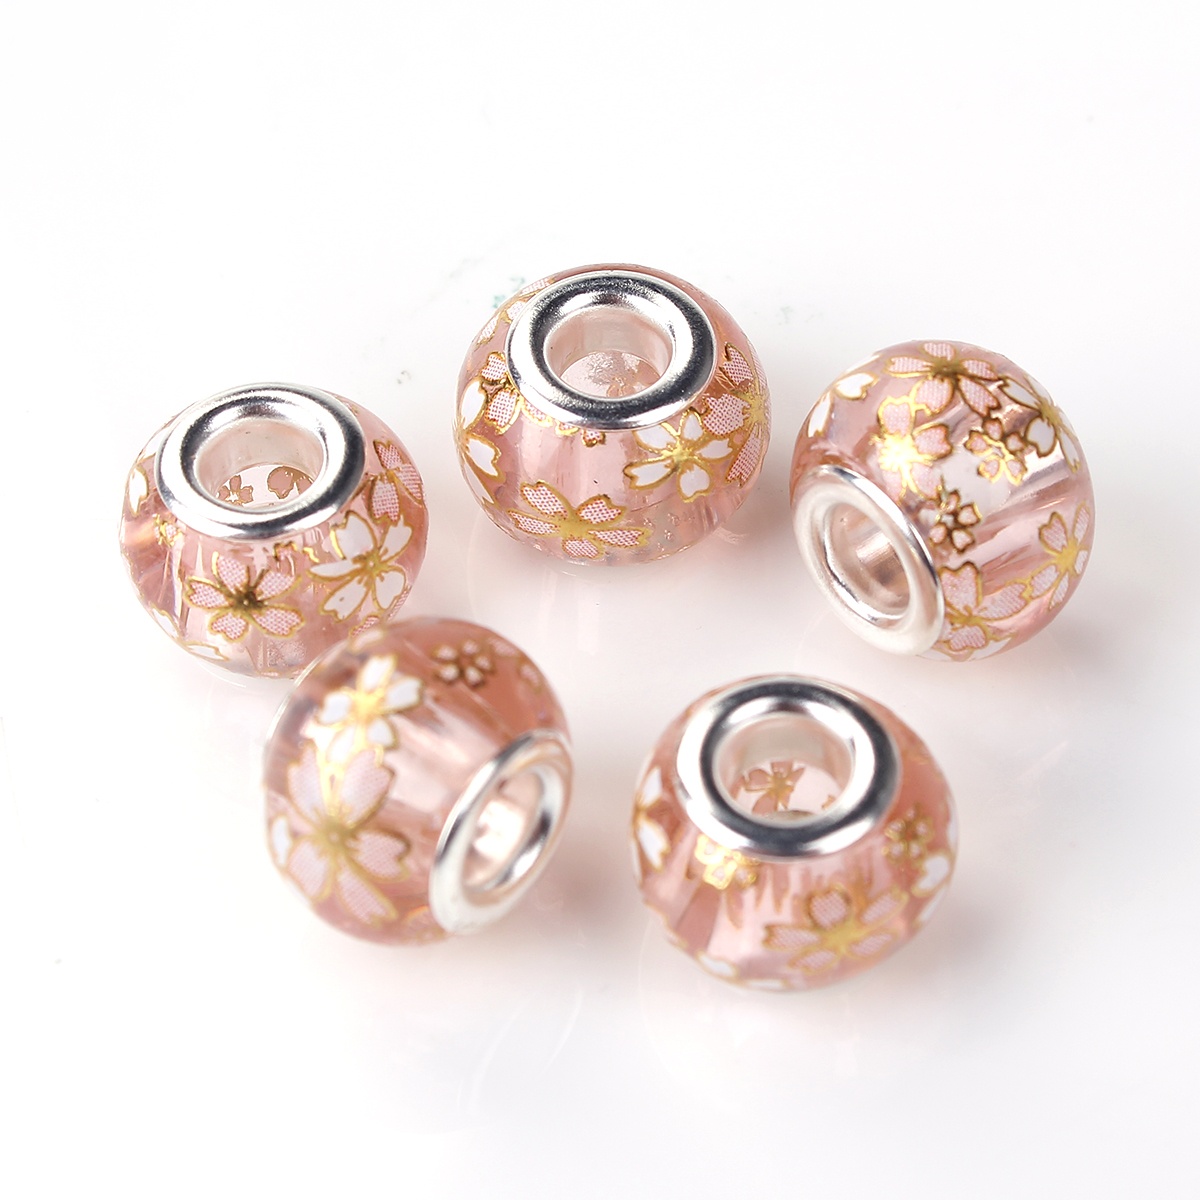 Picture of Glass Japan Painting Vintage Japanese Tensha European Style Large Hole Charm Beads Round Silver Plated Sakura Flower Light Pink Transparent About 14mm( 4/8") Dia, Hole: Approx 4.7mm, 5 PCs